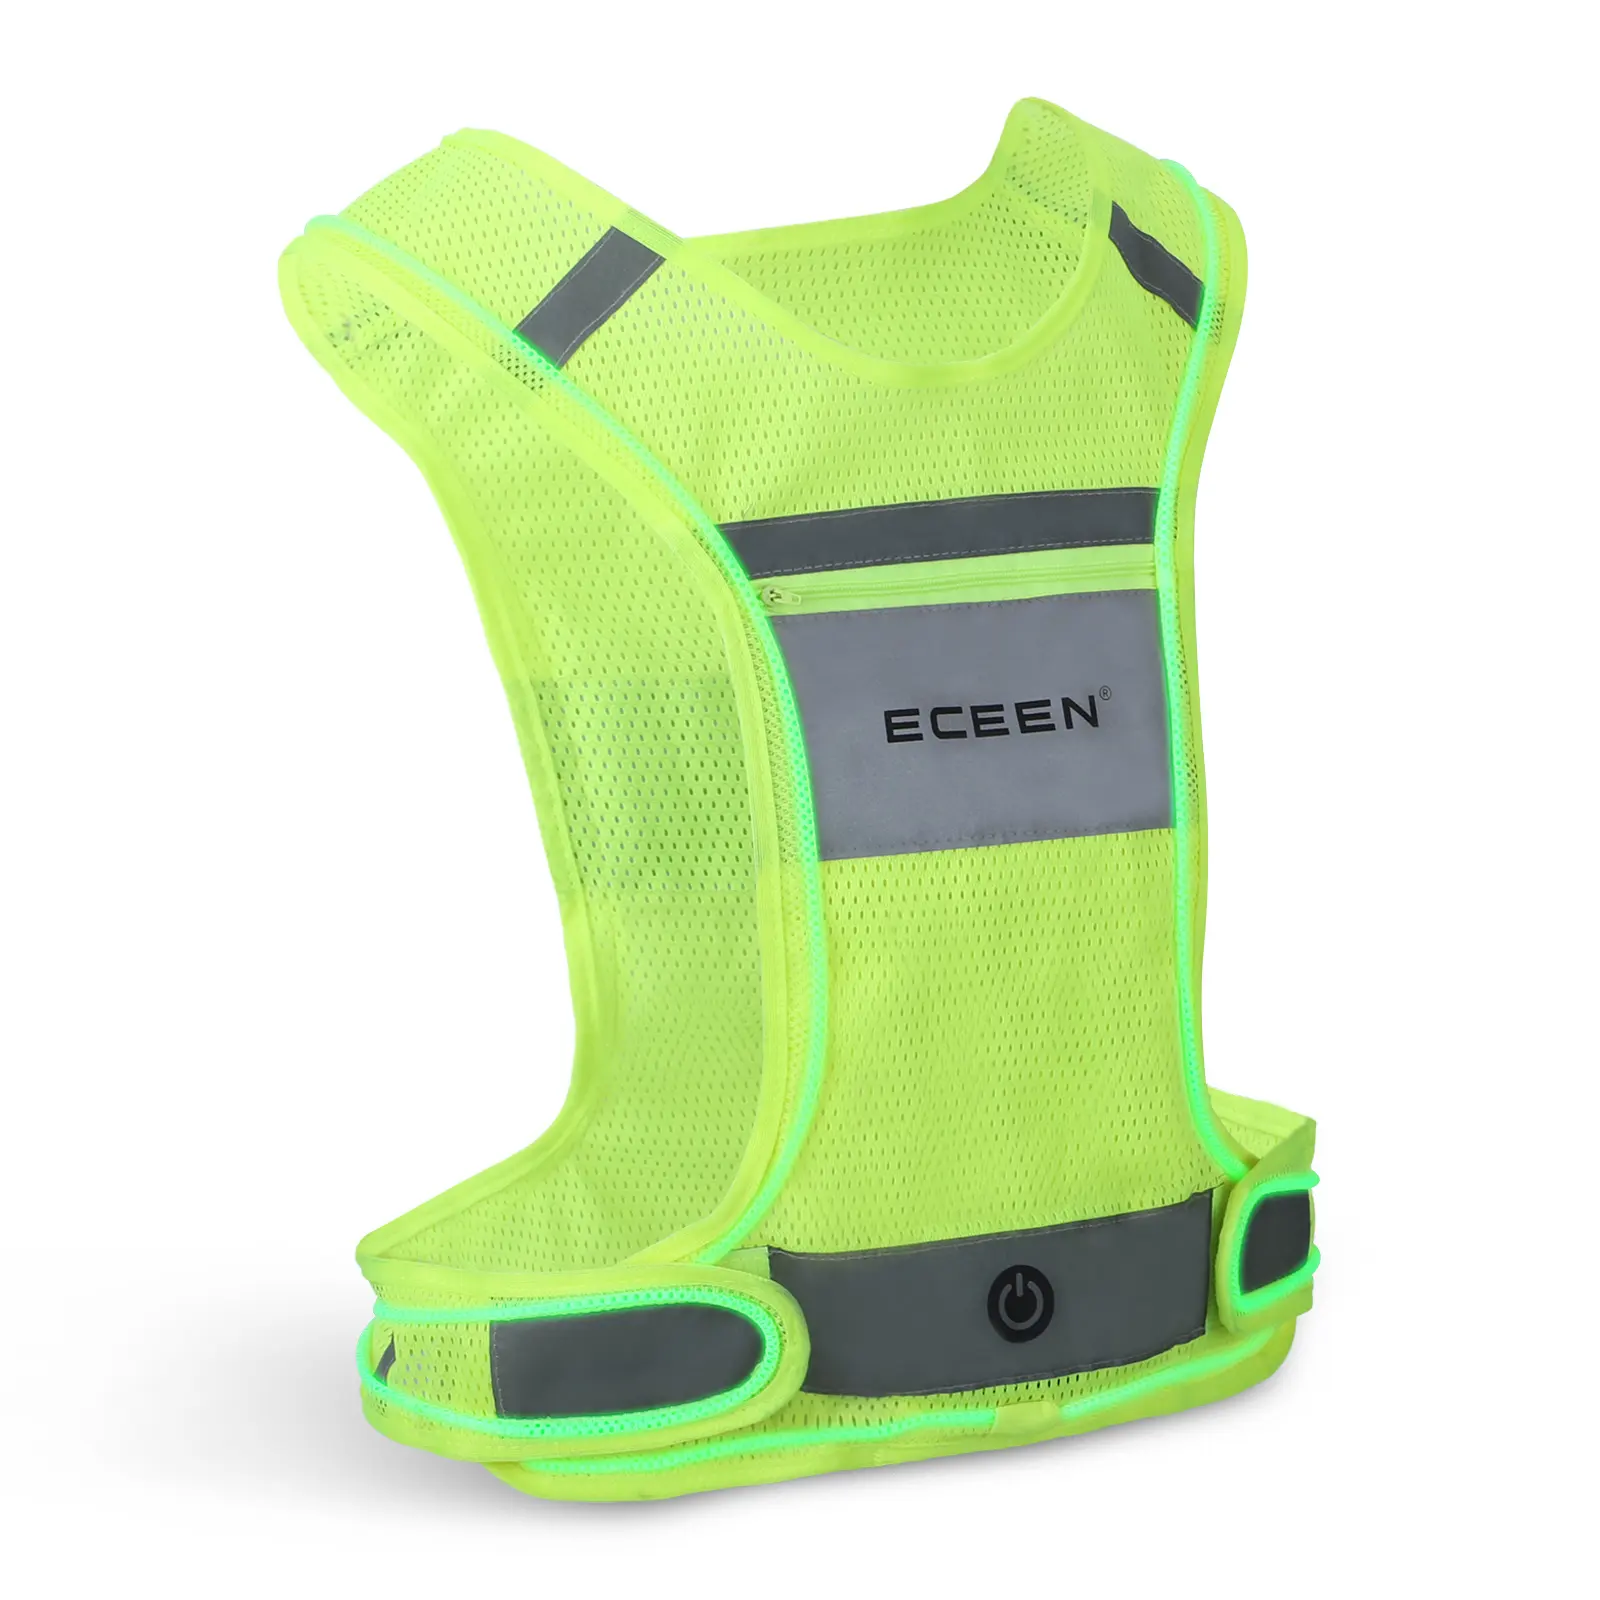 cycling high visibility chalecos safety 3 Light Modes rechargeable battery LED safety vest with lights jacket white Vest